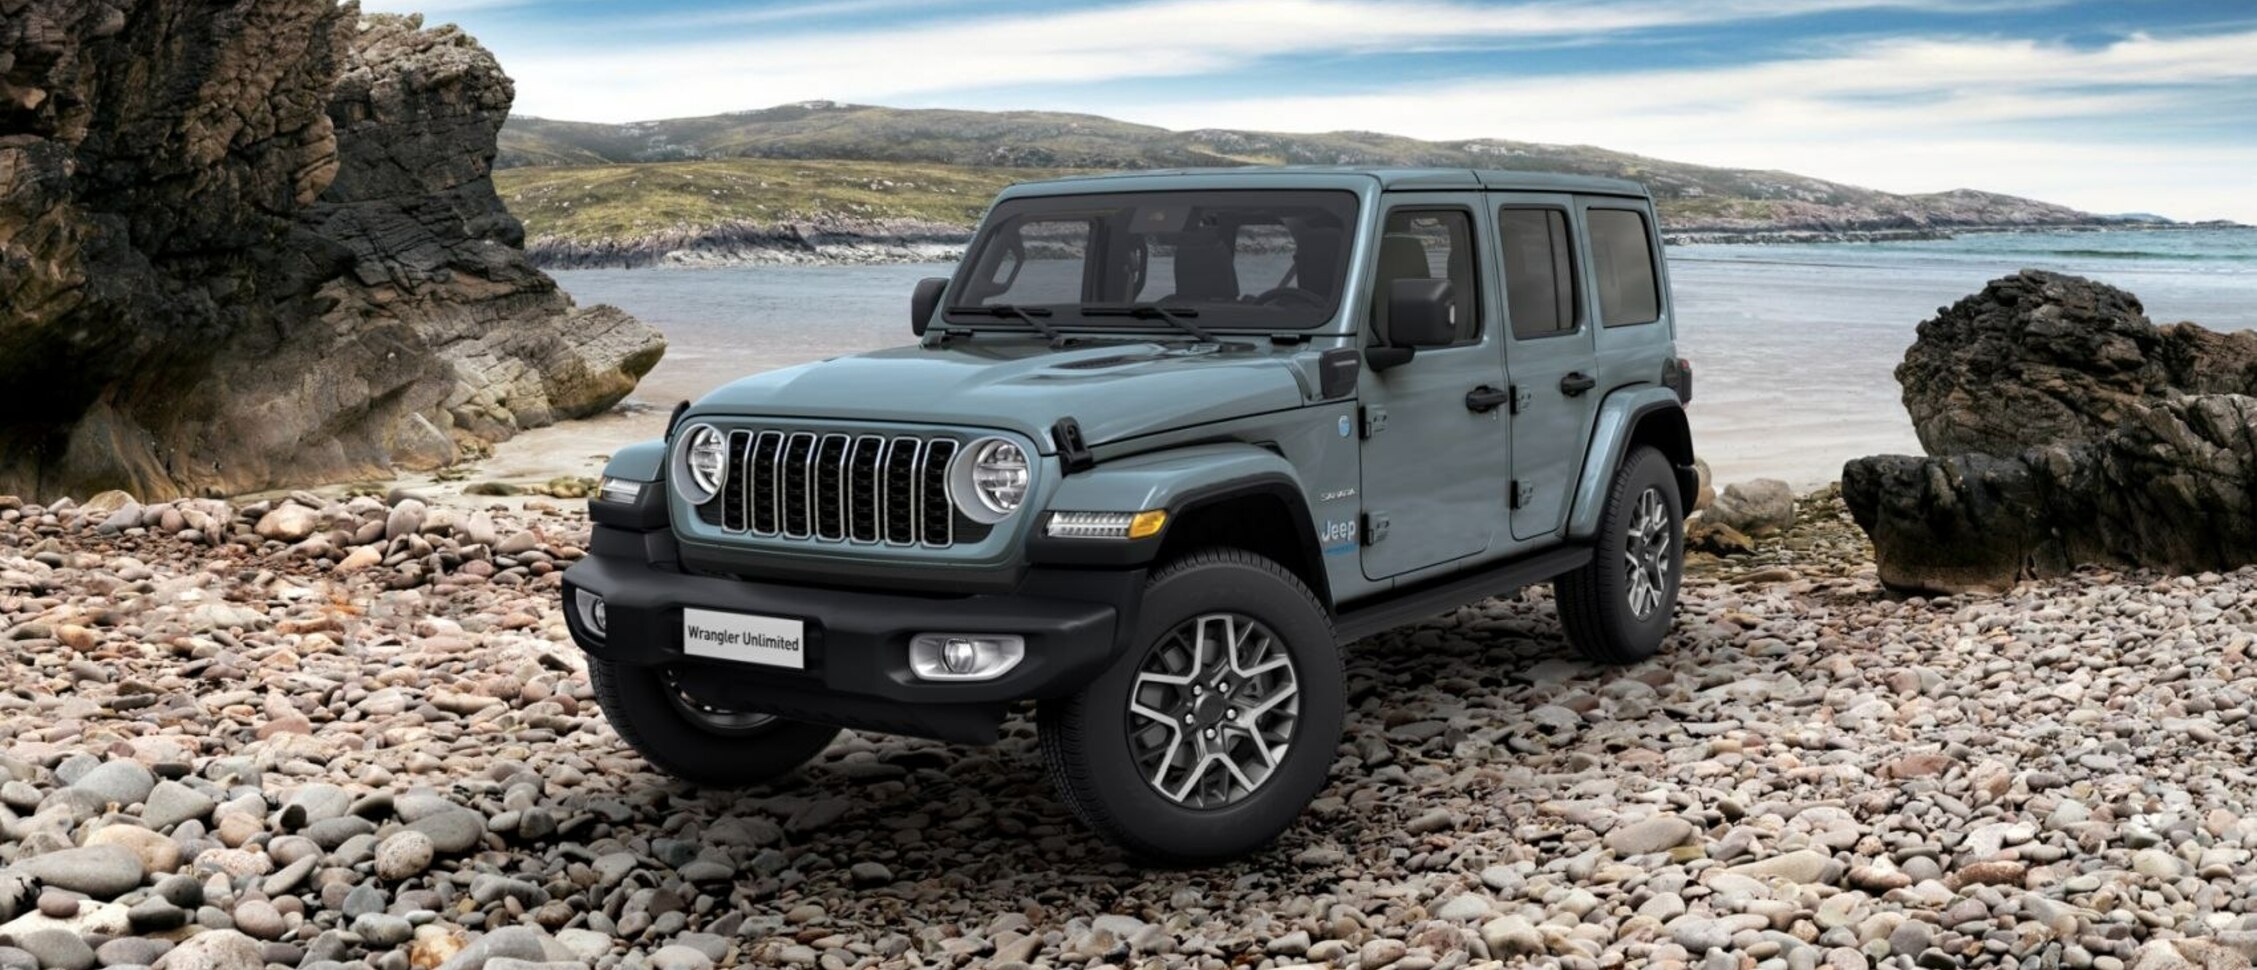 Jeep Wrangler IV Unlimited (JL, facelift 2023) Sahara 2.0L (380 Hp) 4xe Plug-in Hybrid 4WD Automatic 2023